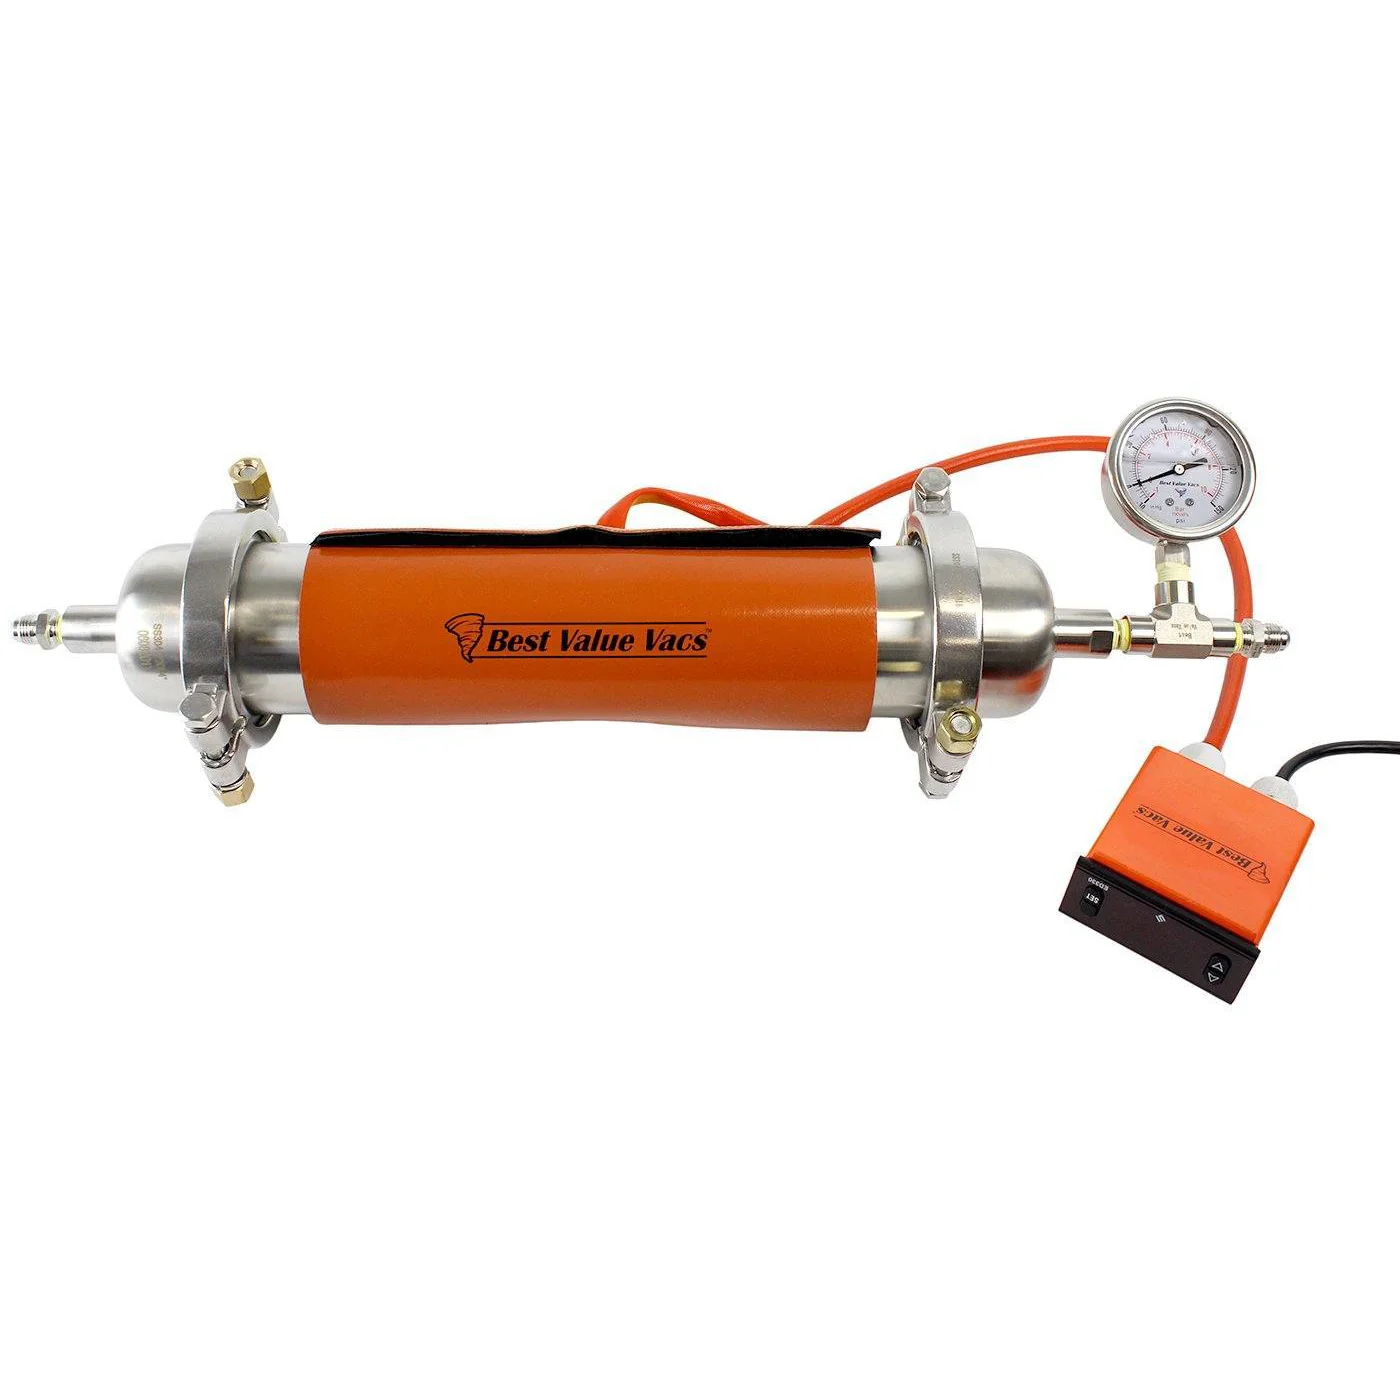 Molecular Sieve Filter Drier W/ Heating Jacket Questions & Answers